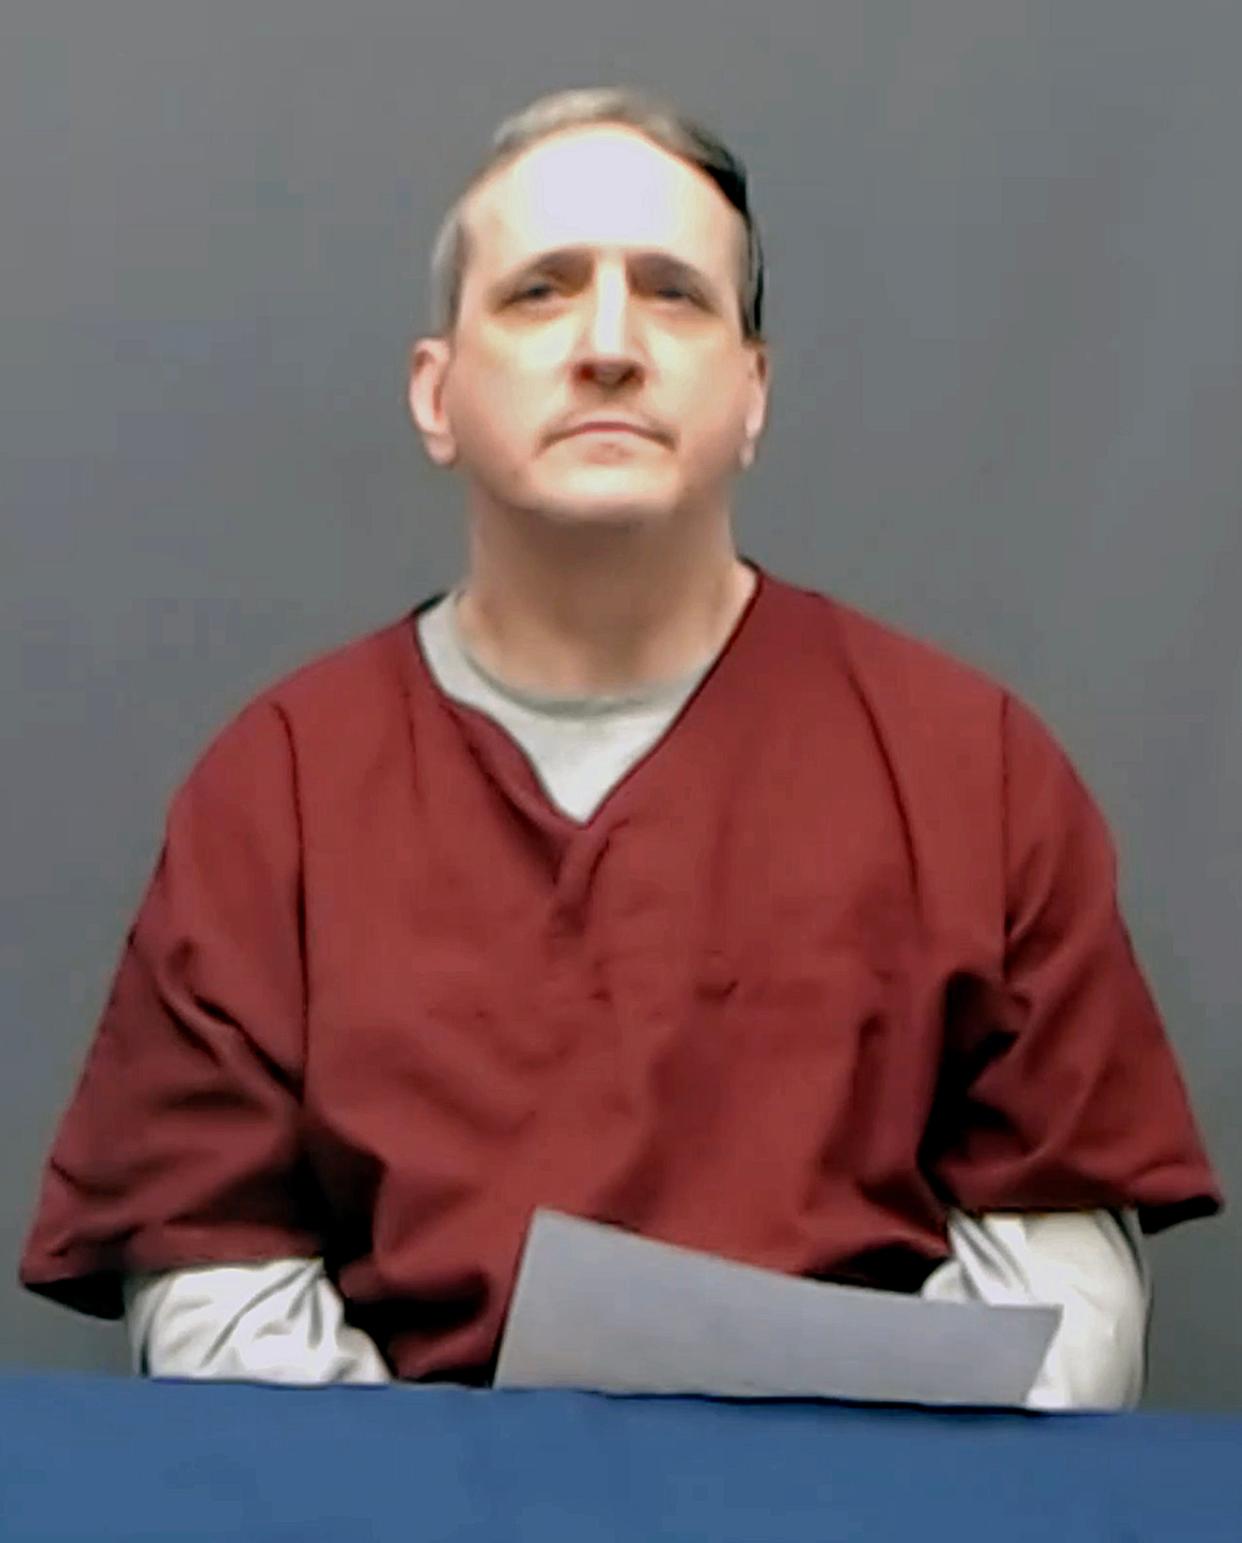 A screenshot of Richard Glossip shows the death row inmate as he speaks to the Oklahoma Pardon and Parole Board during his clemency hearing in April.